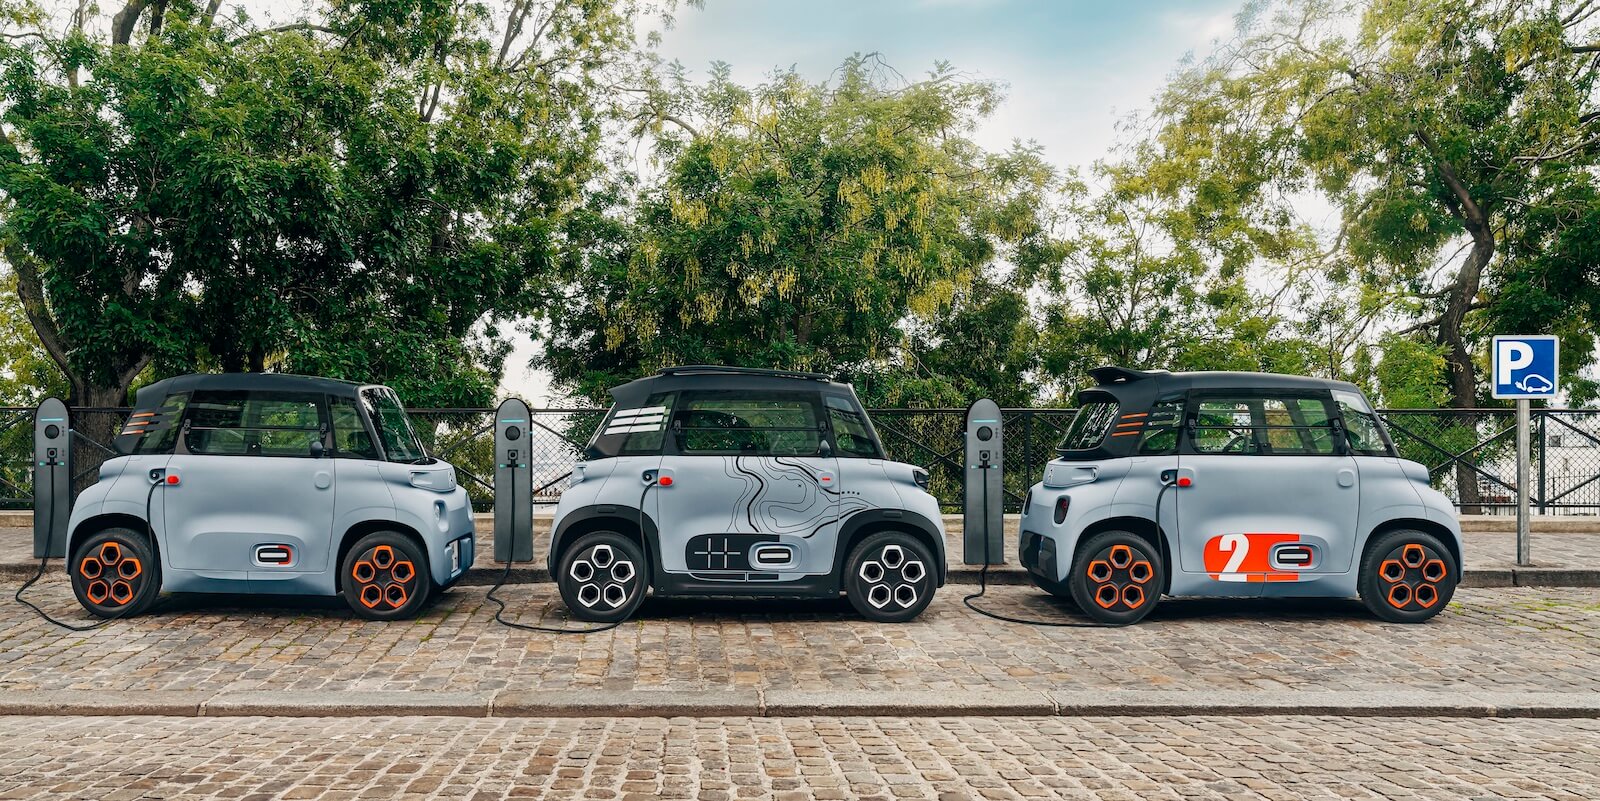 Orders open for Citroën's tiny all-electric Ami - Karfu